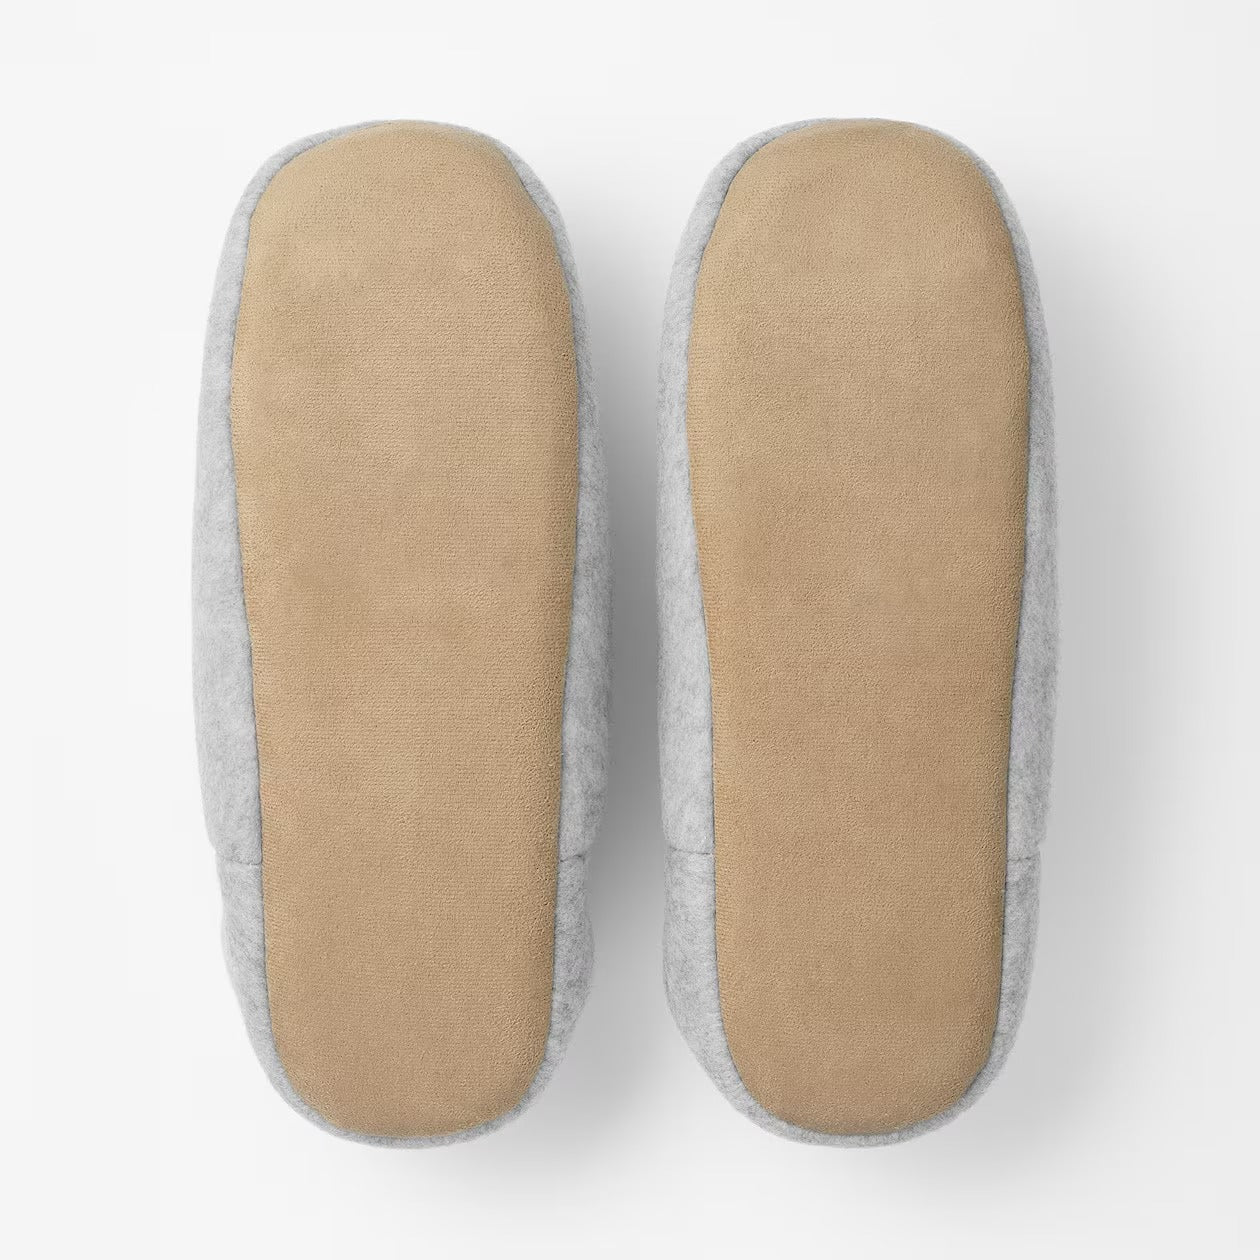 MUJI Lyocell blend knit room shoes slippers